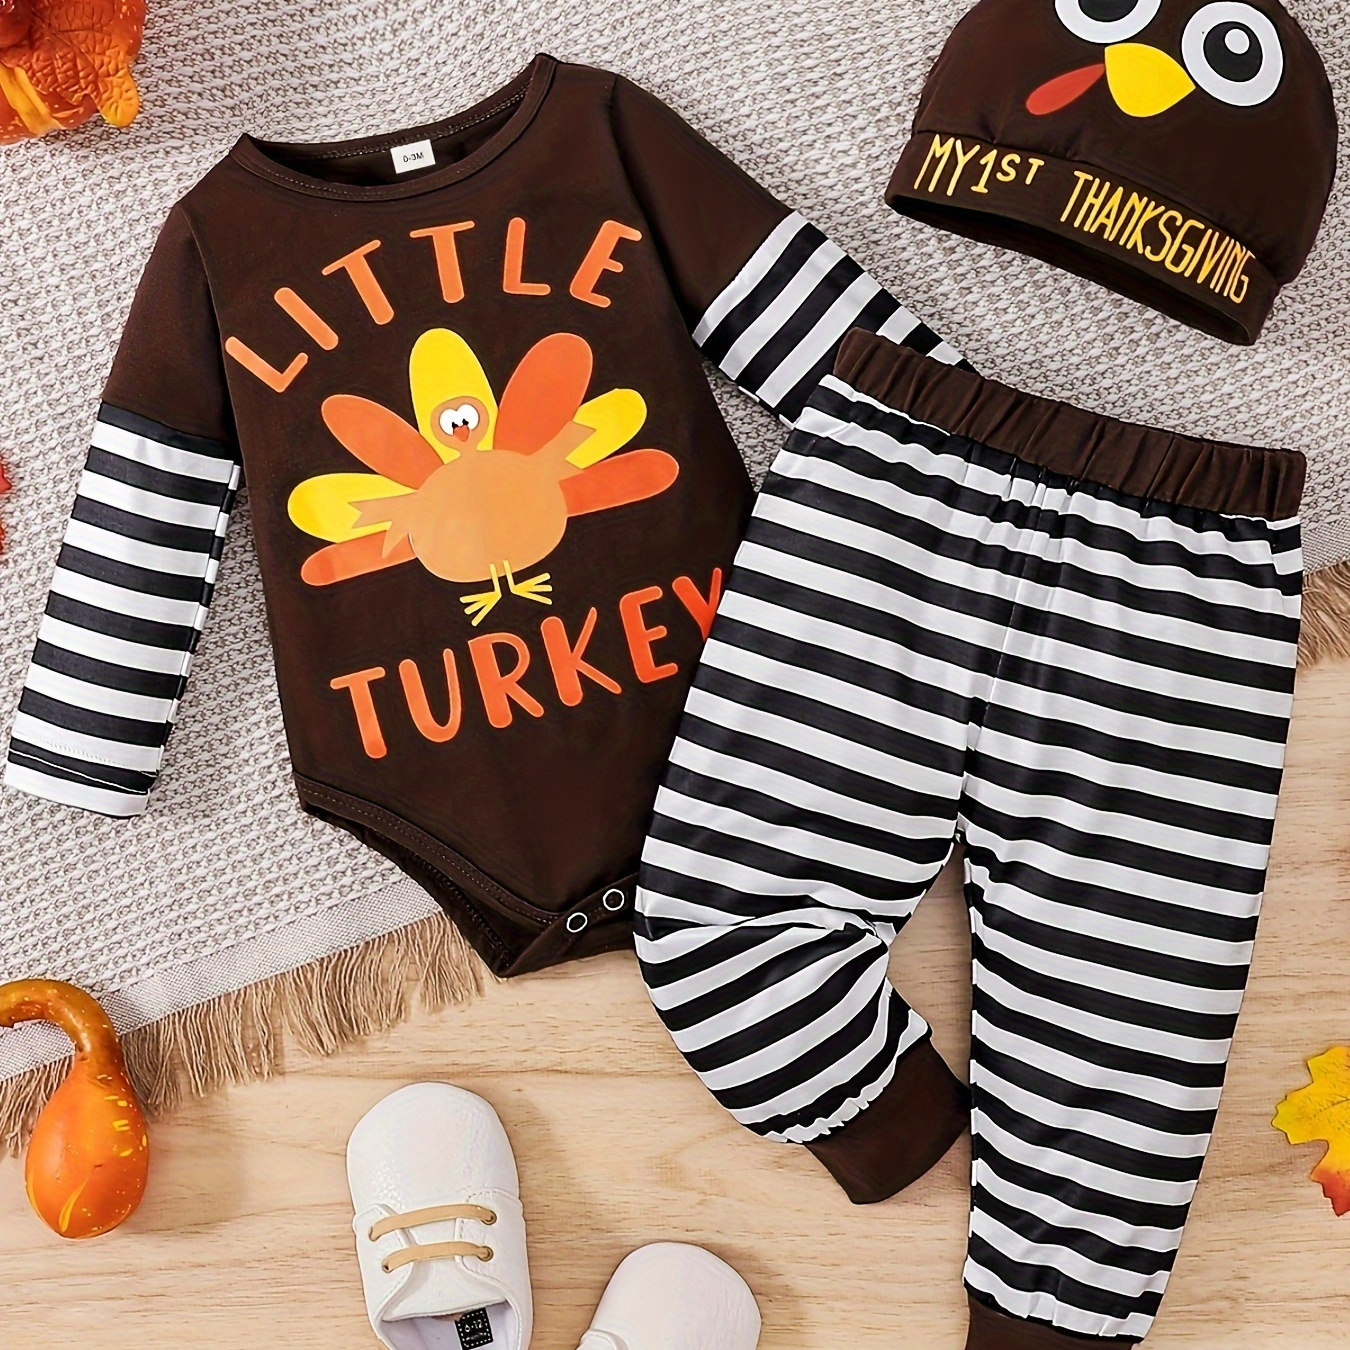 

My First Thanksgiving Party Baby Boy Outfits, Infant Toddler Cute Turkey Print Striped Romper Striped Pants Hat 3pcs Set 0-18 Months